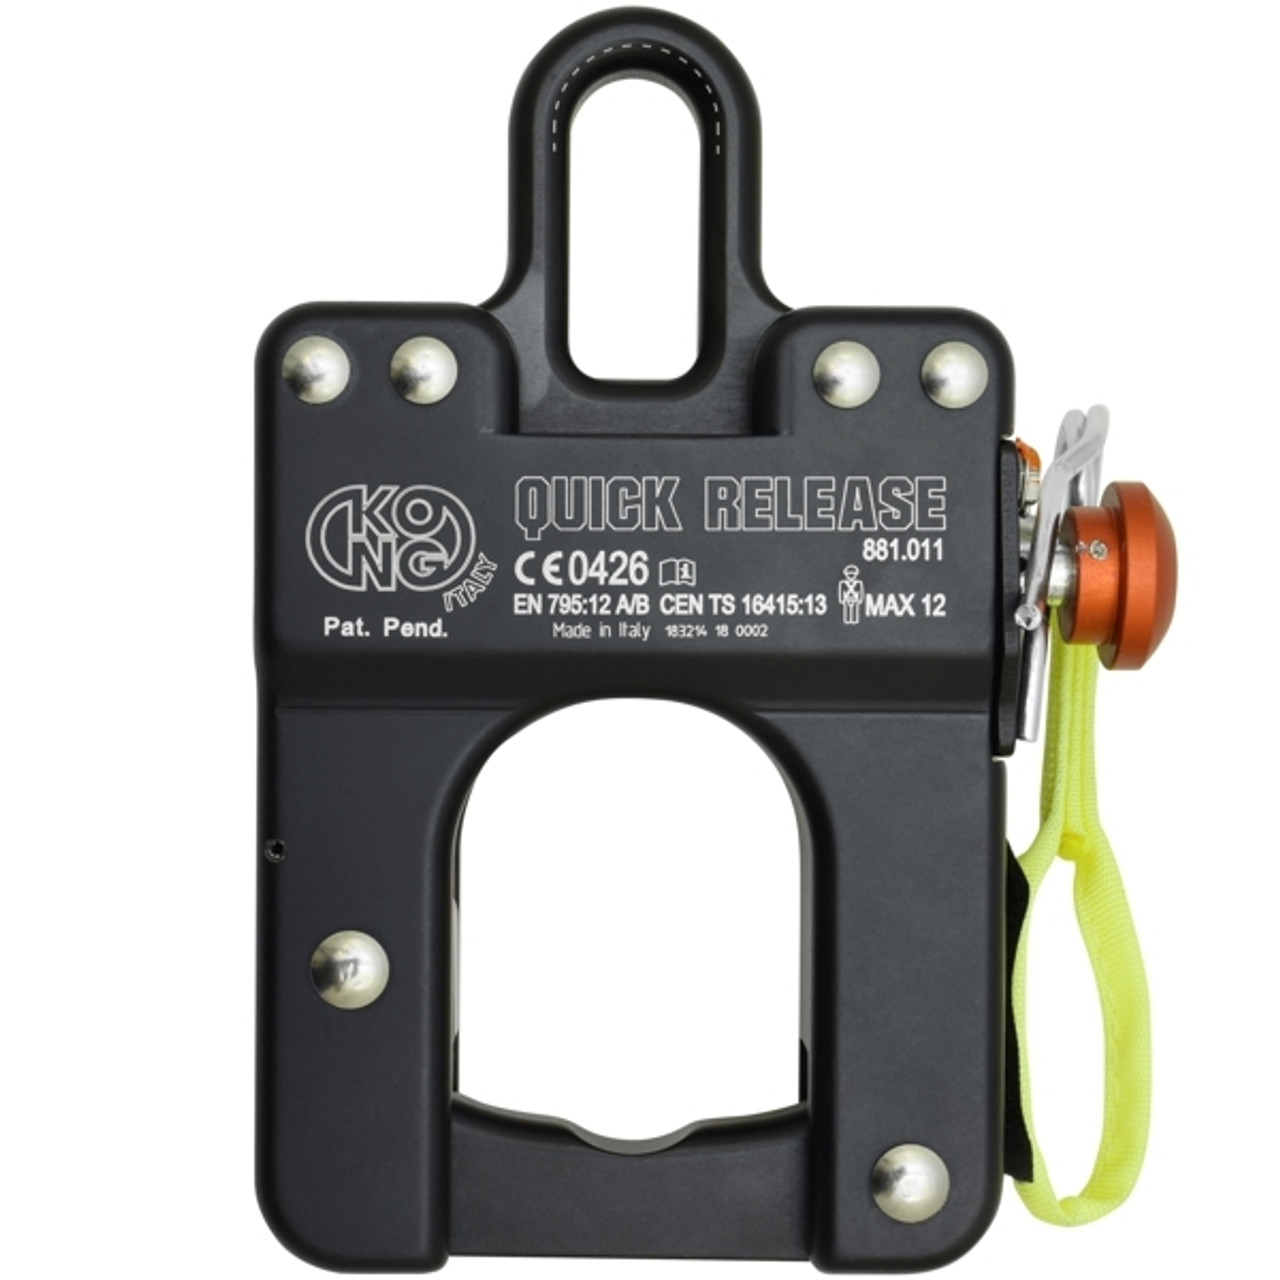 Quick Release 525 - Quick release for water ski KONG